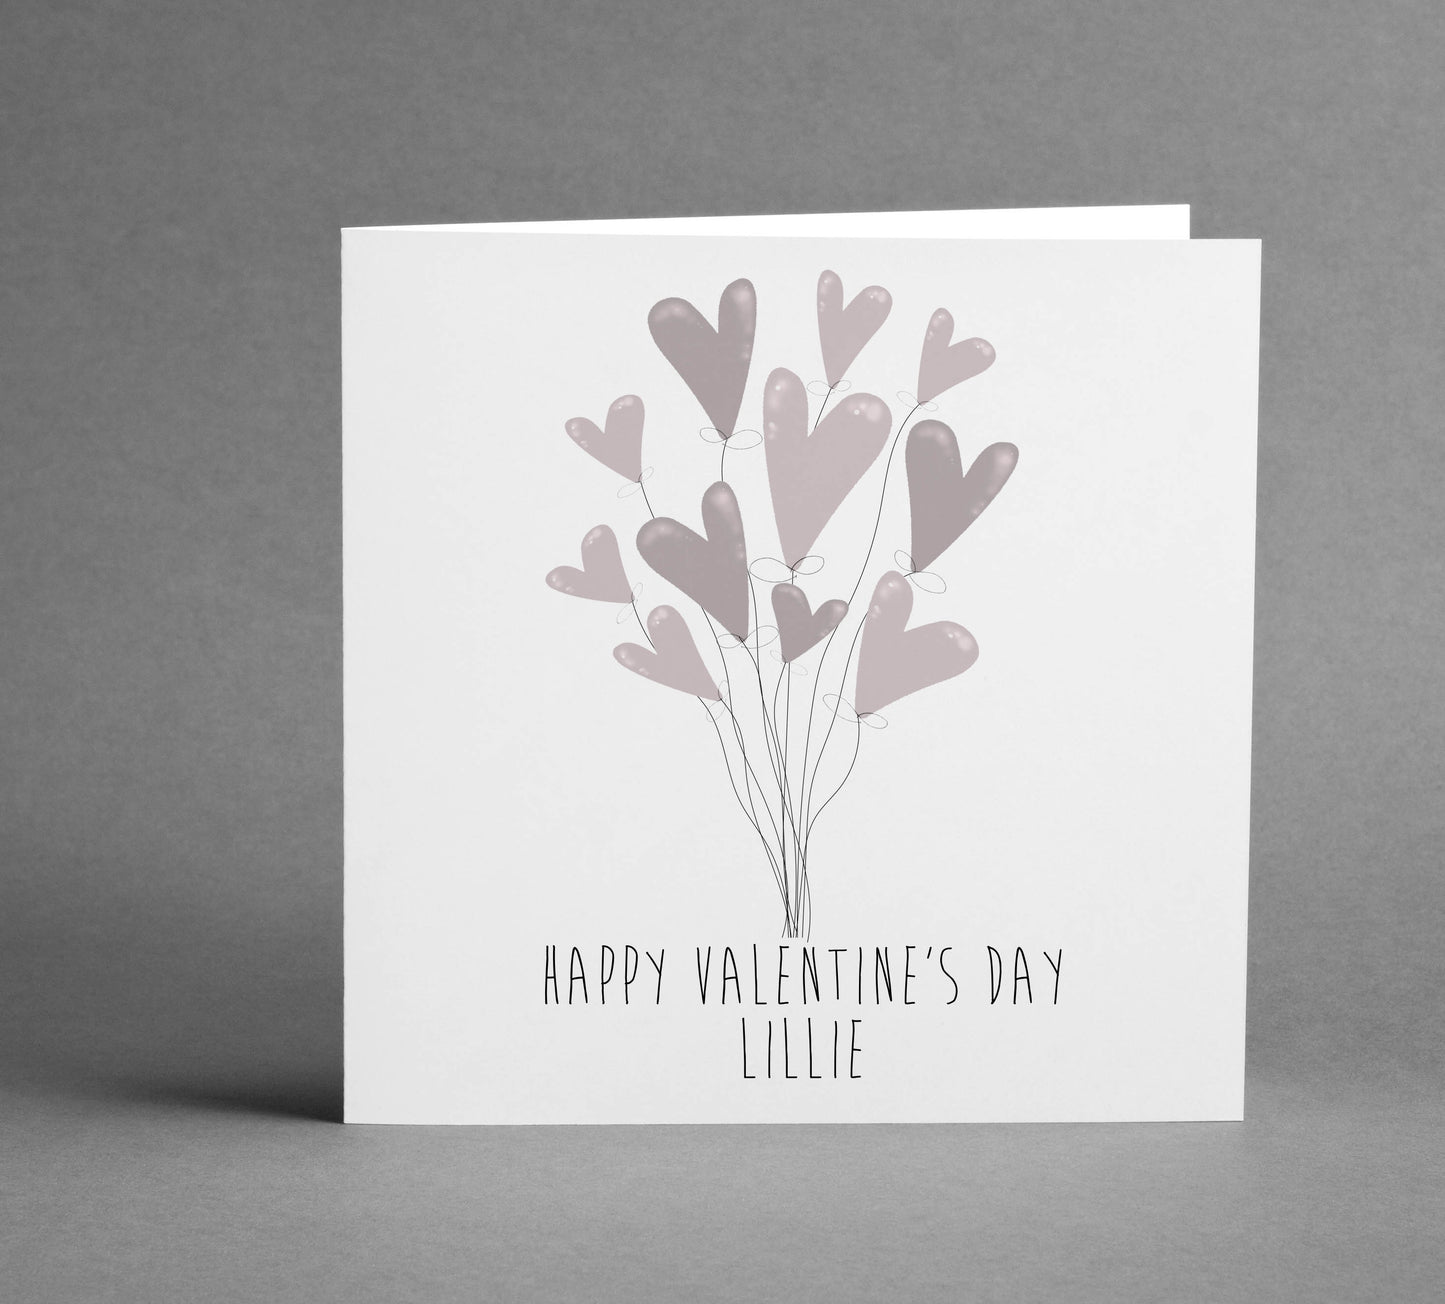 Personalised Valentine Balloon Hearts square card